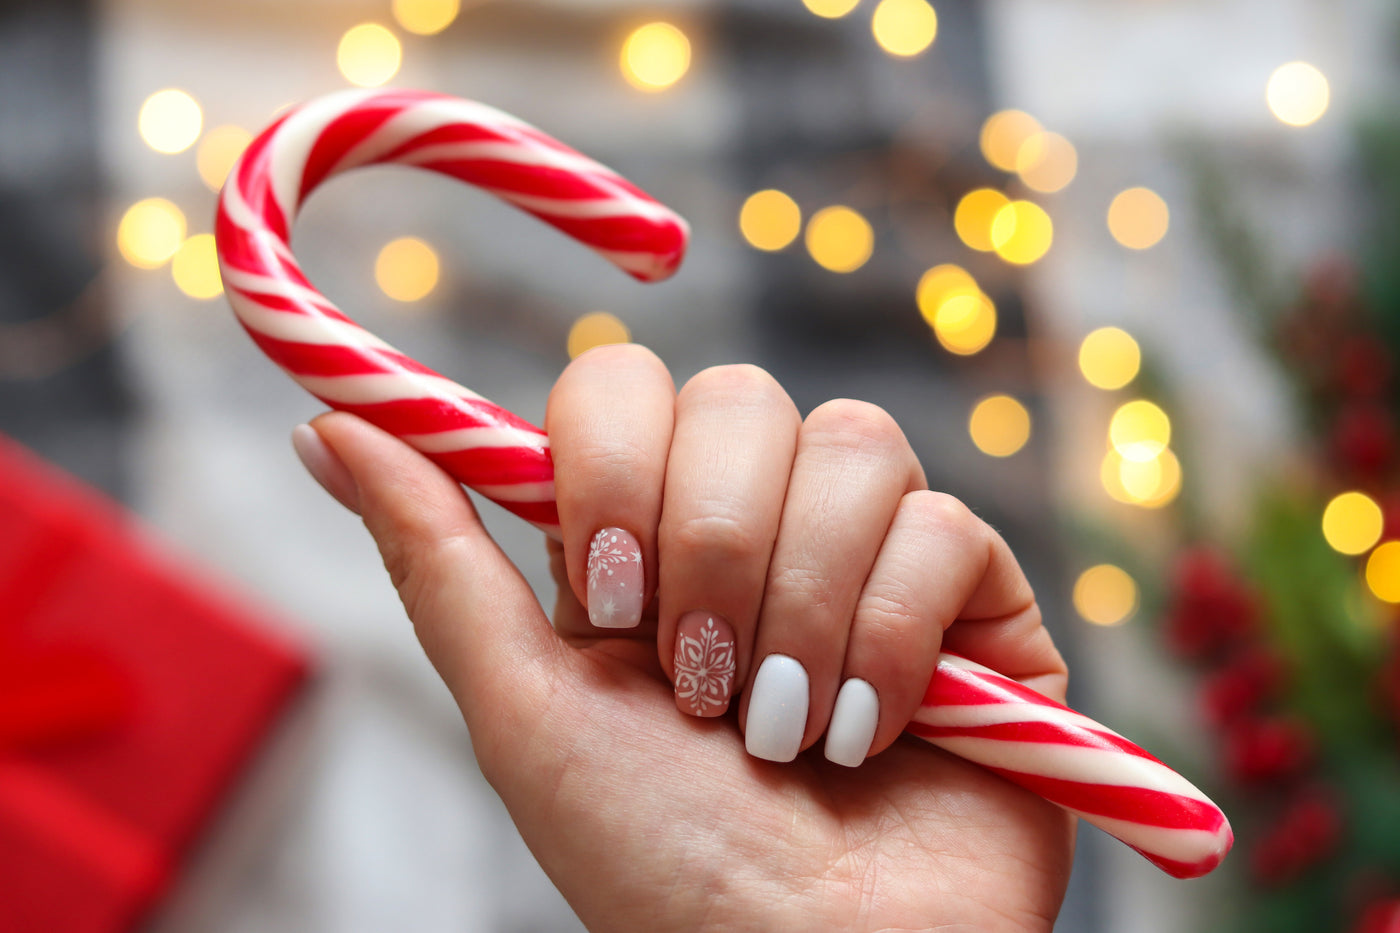 Winter nails holding a candy cane